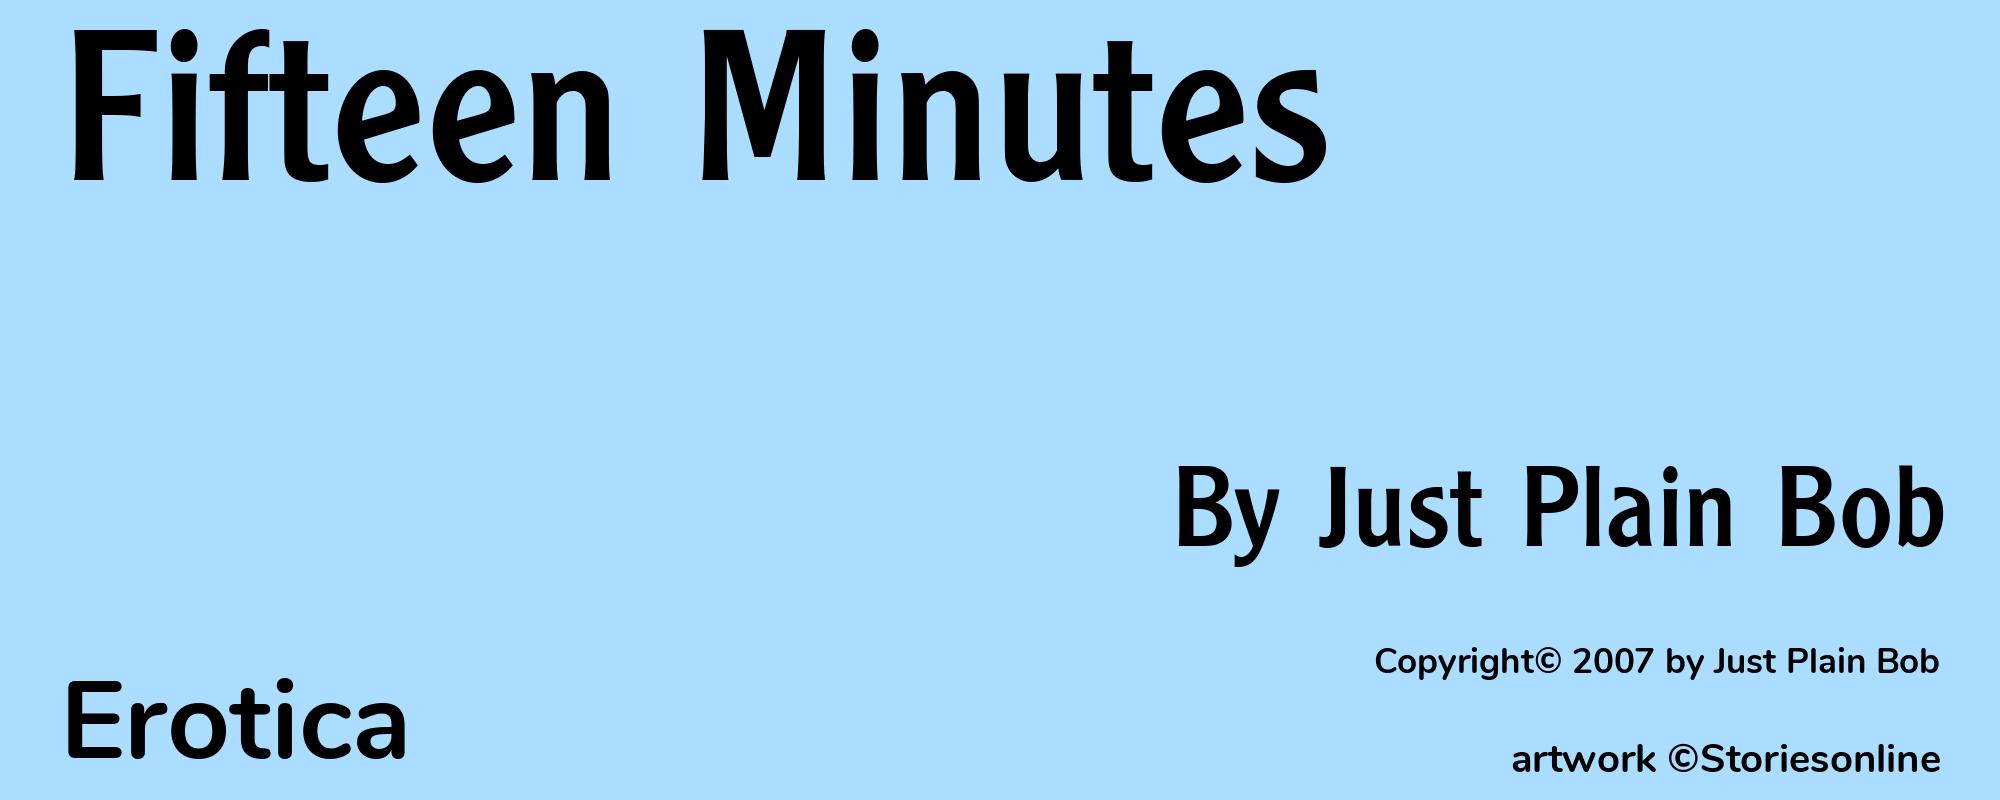 Fifteen Minutes - Cover